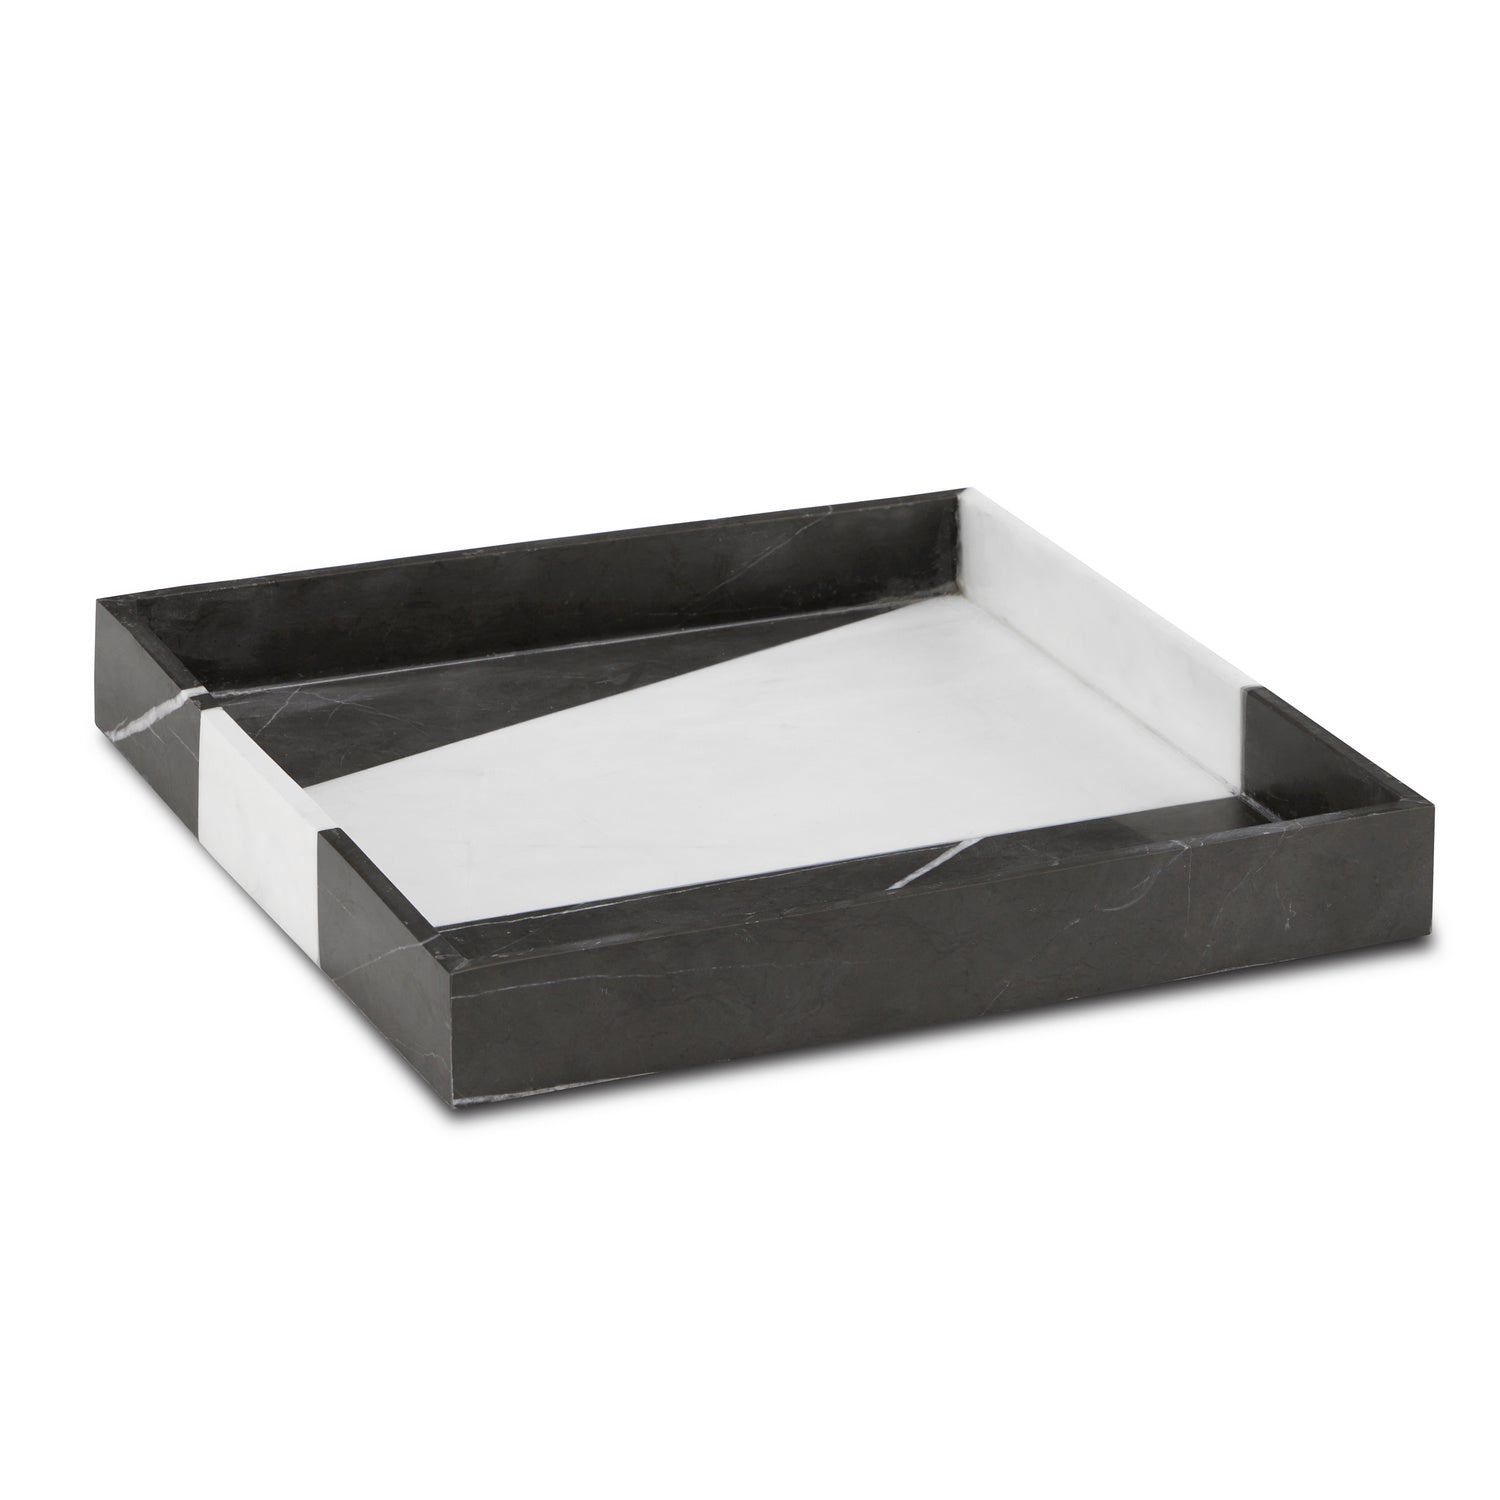 Tray from the Sena collection in Black/White finish